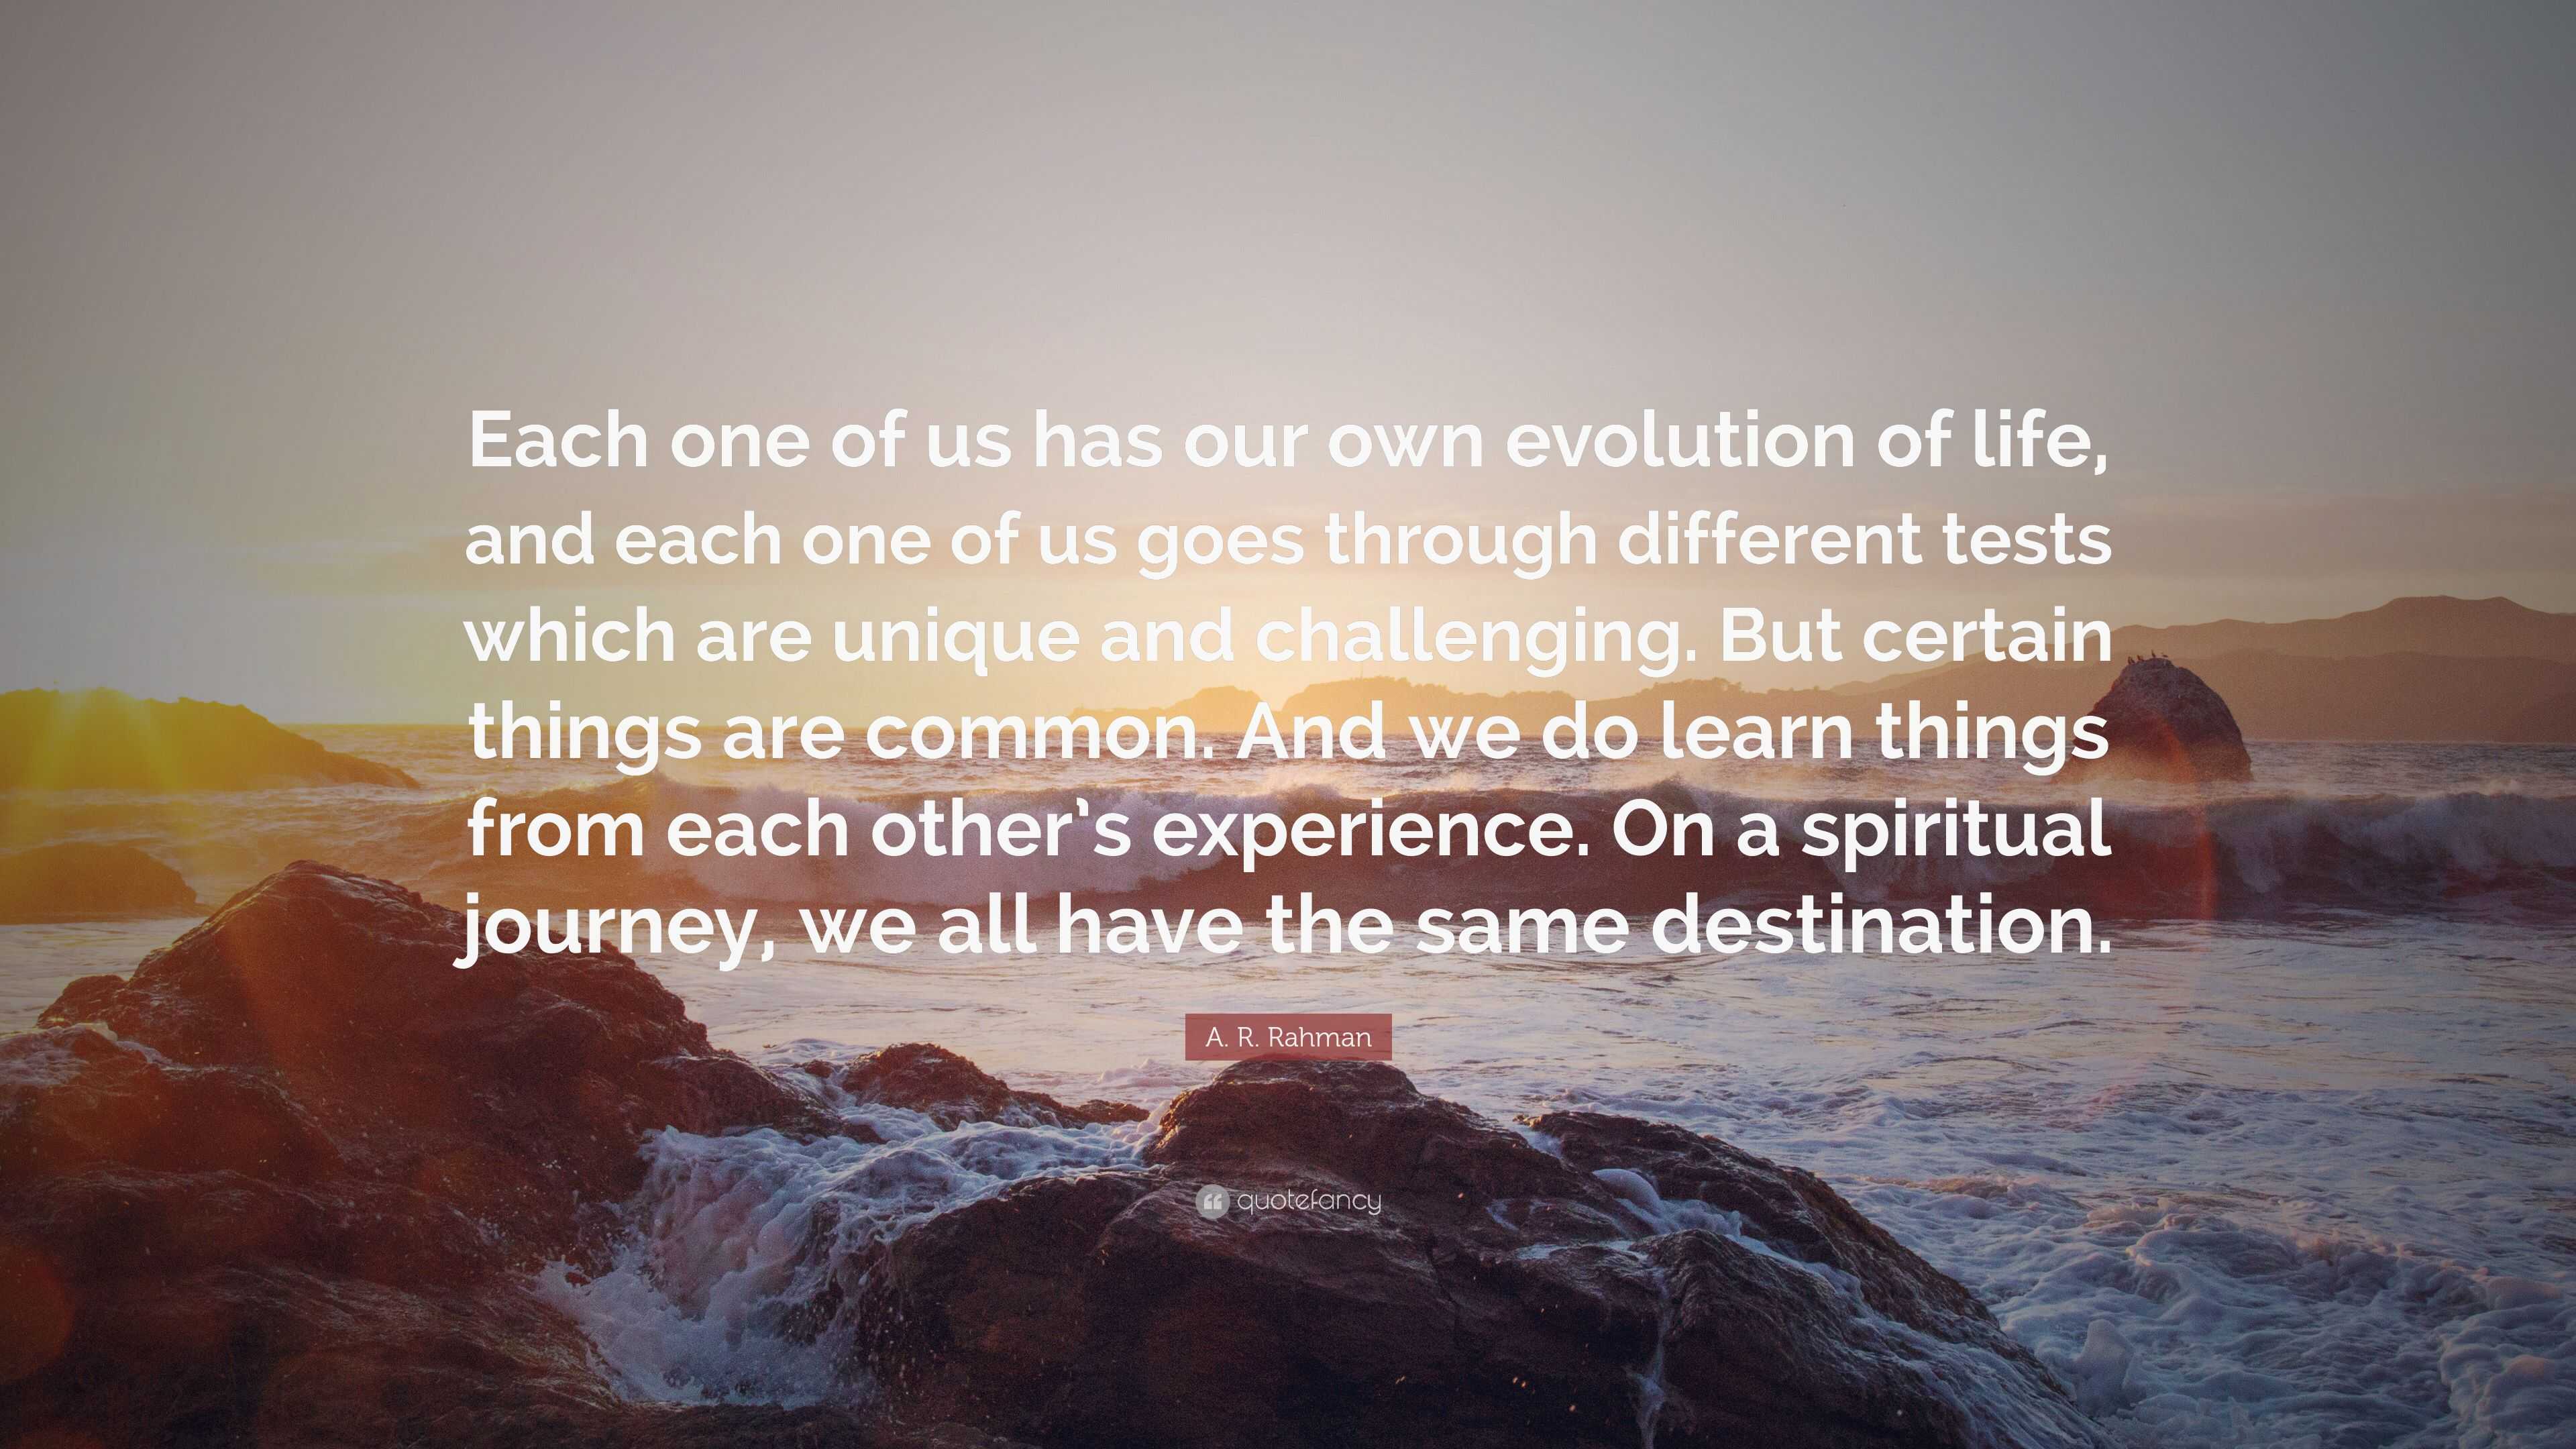 A. R. Rahman Quote: “Each one of us has our own evolution of life